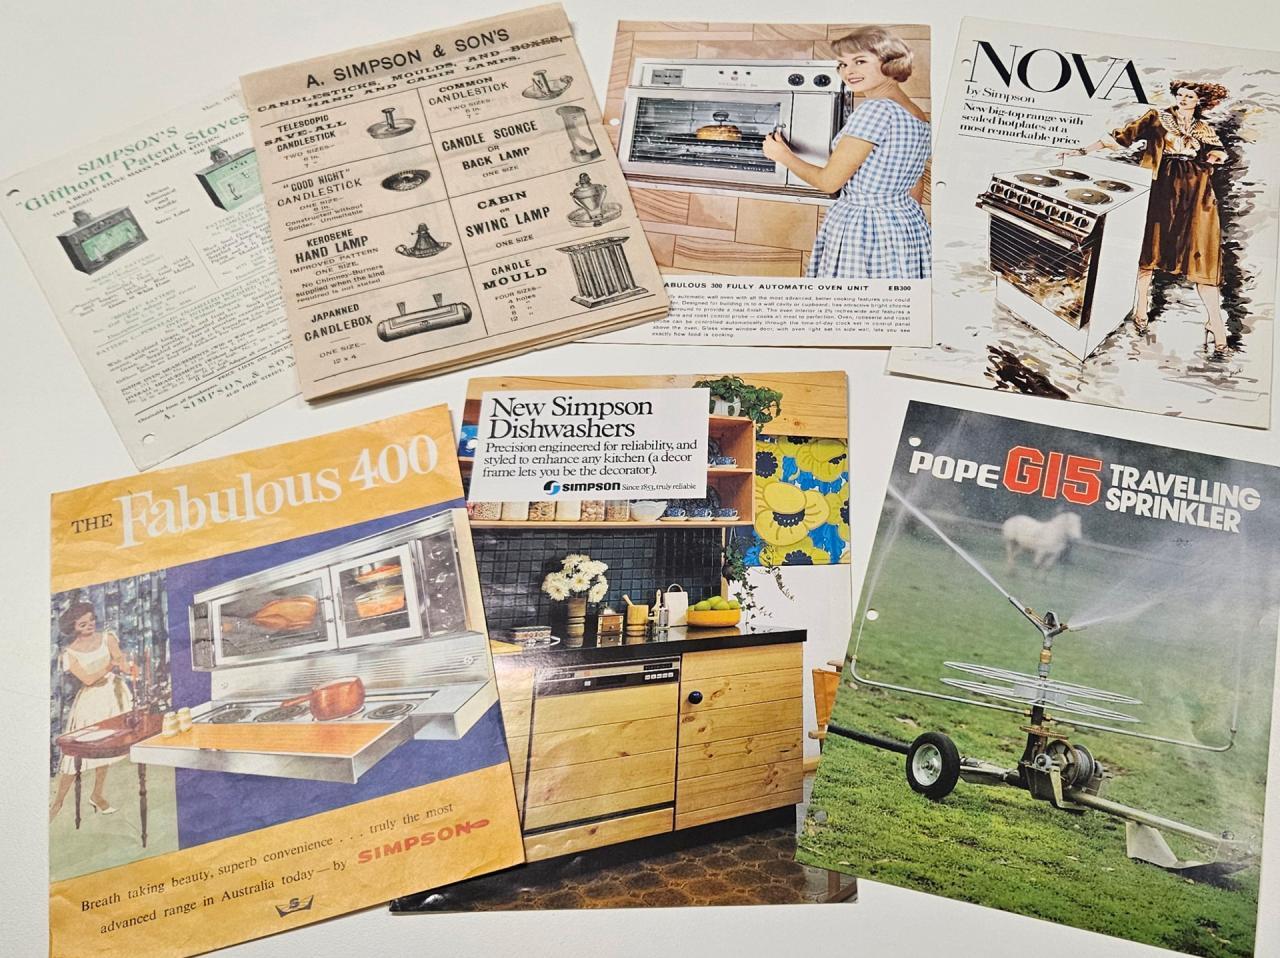 A collection of product catalogues, brochures, and pamphlets, featured in A. Simpson & Son (BRG 9).